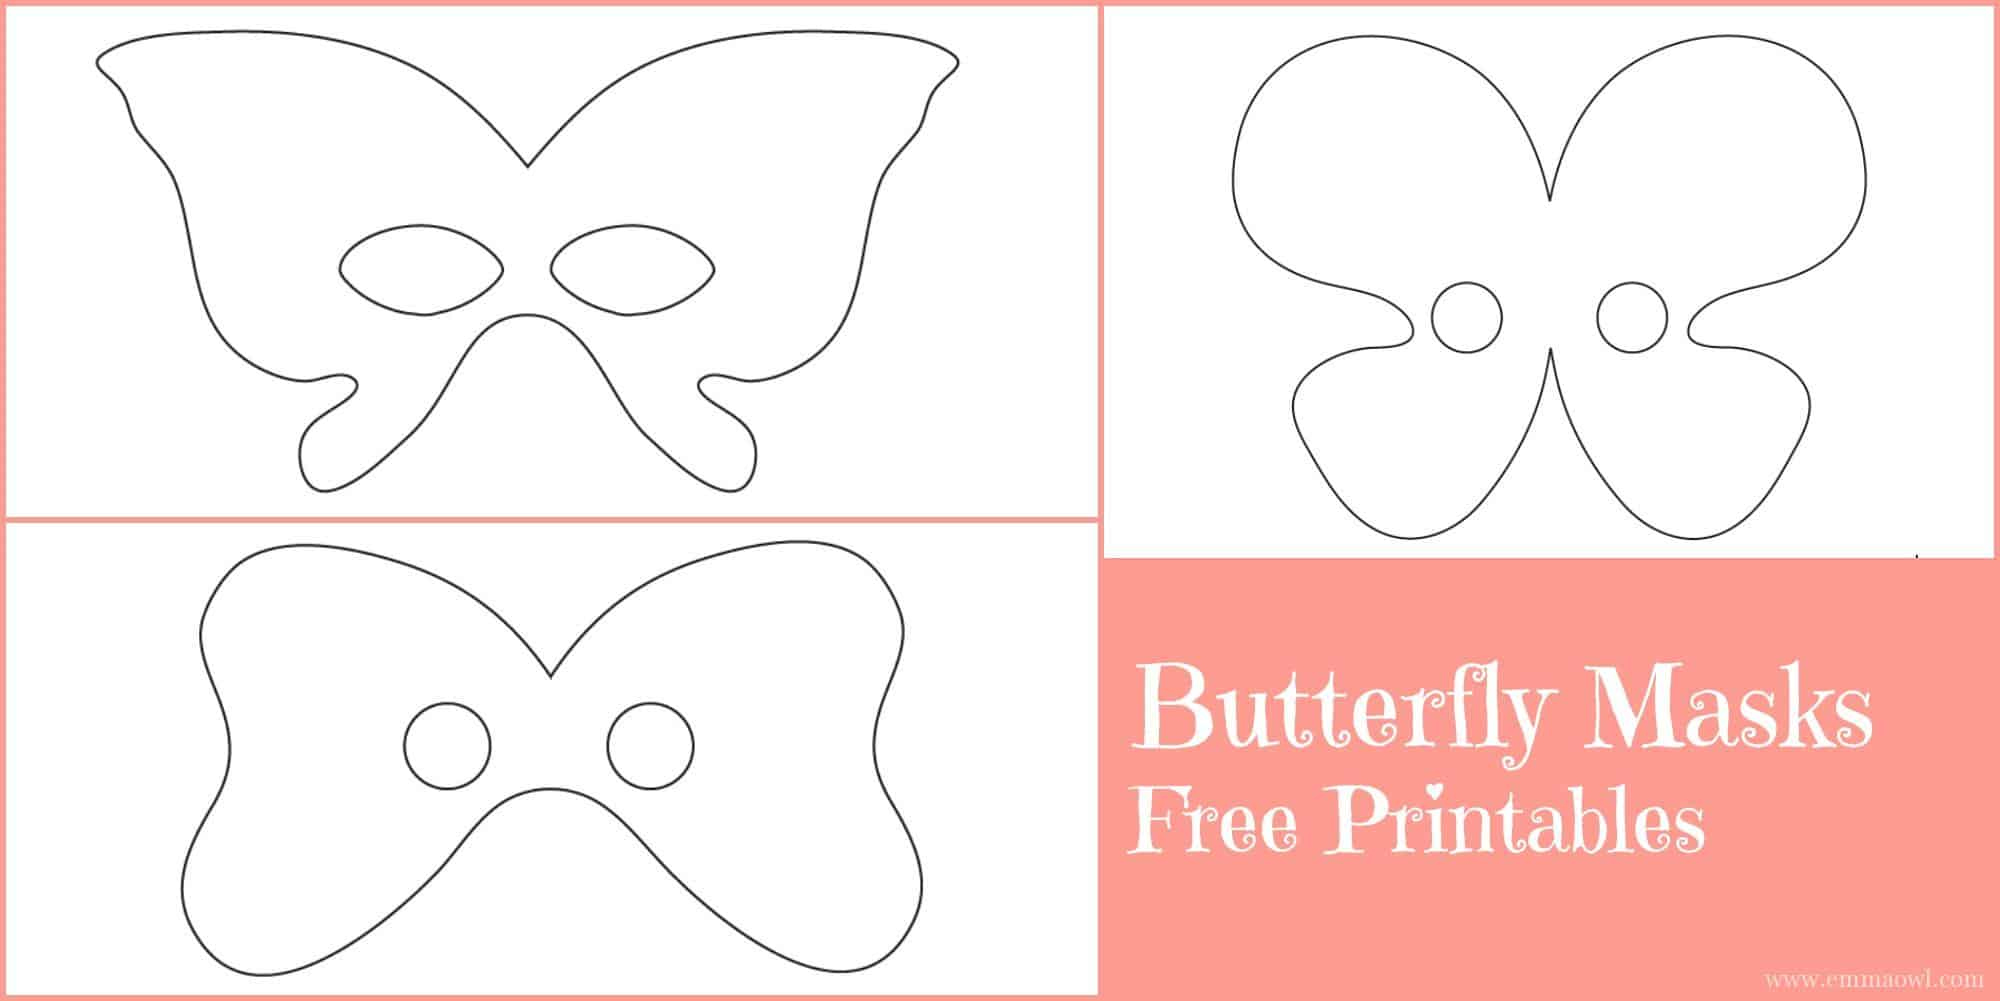 Butterfly Masks - Free Printables - Emma Owl pertaining to Free Printable Masks